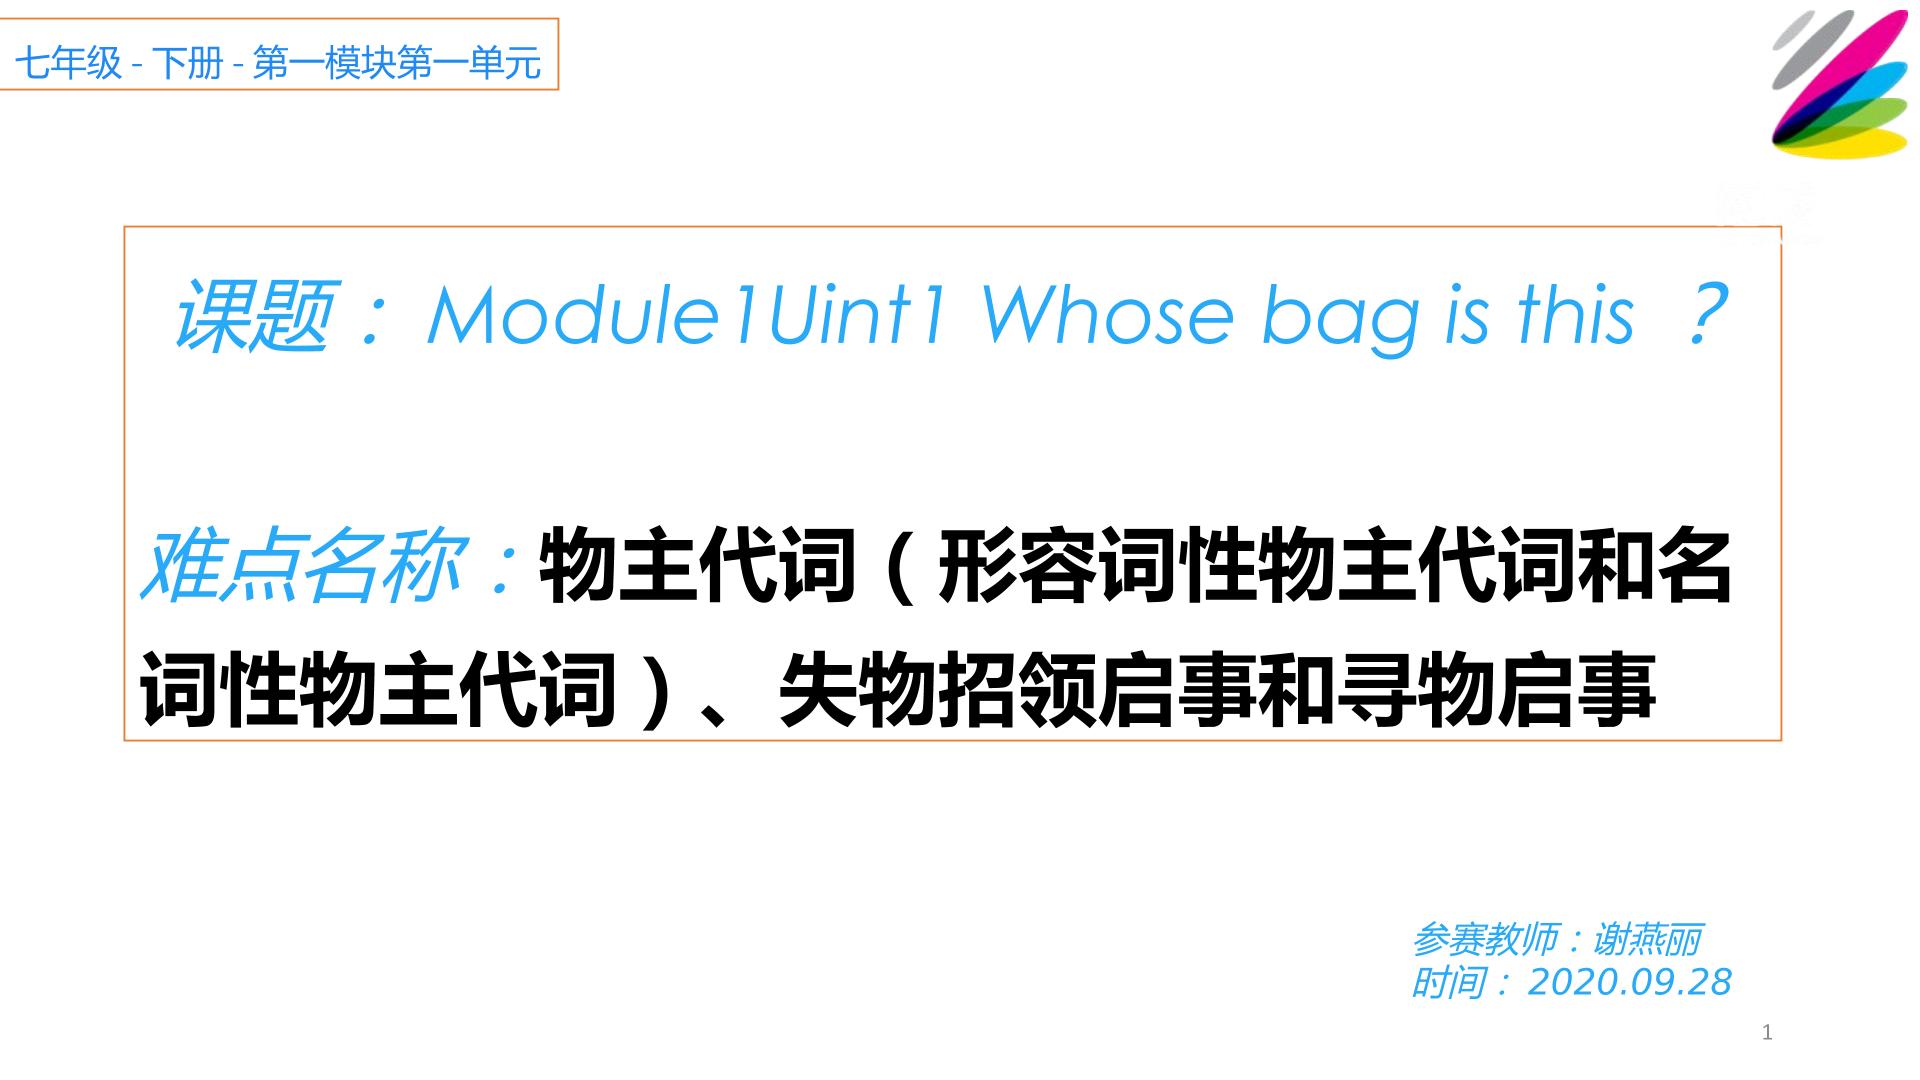 Module1 Uint1 Whose bag is this?（最新）